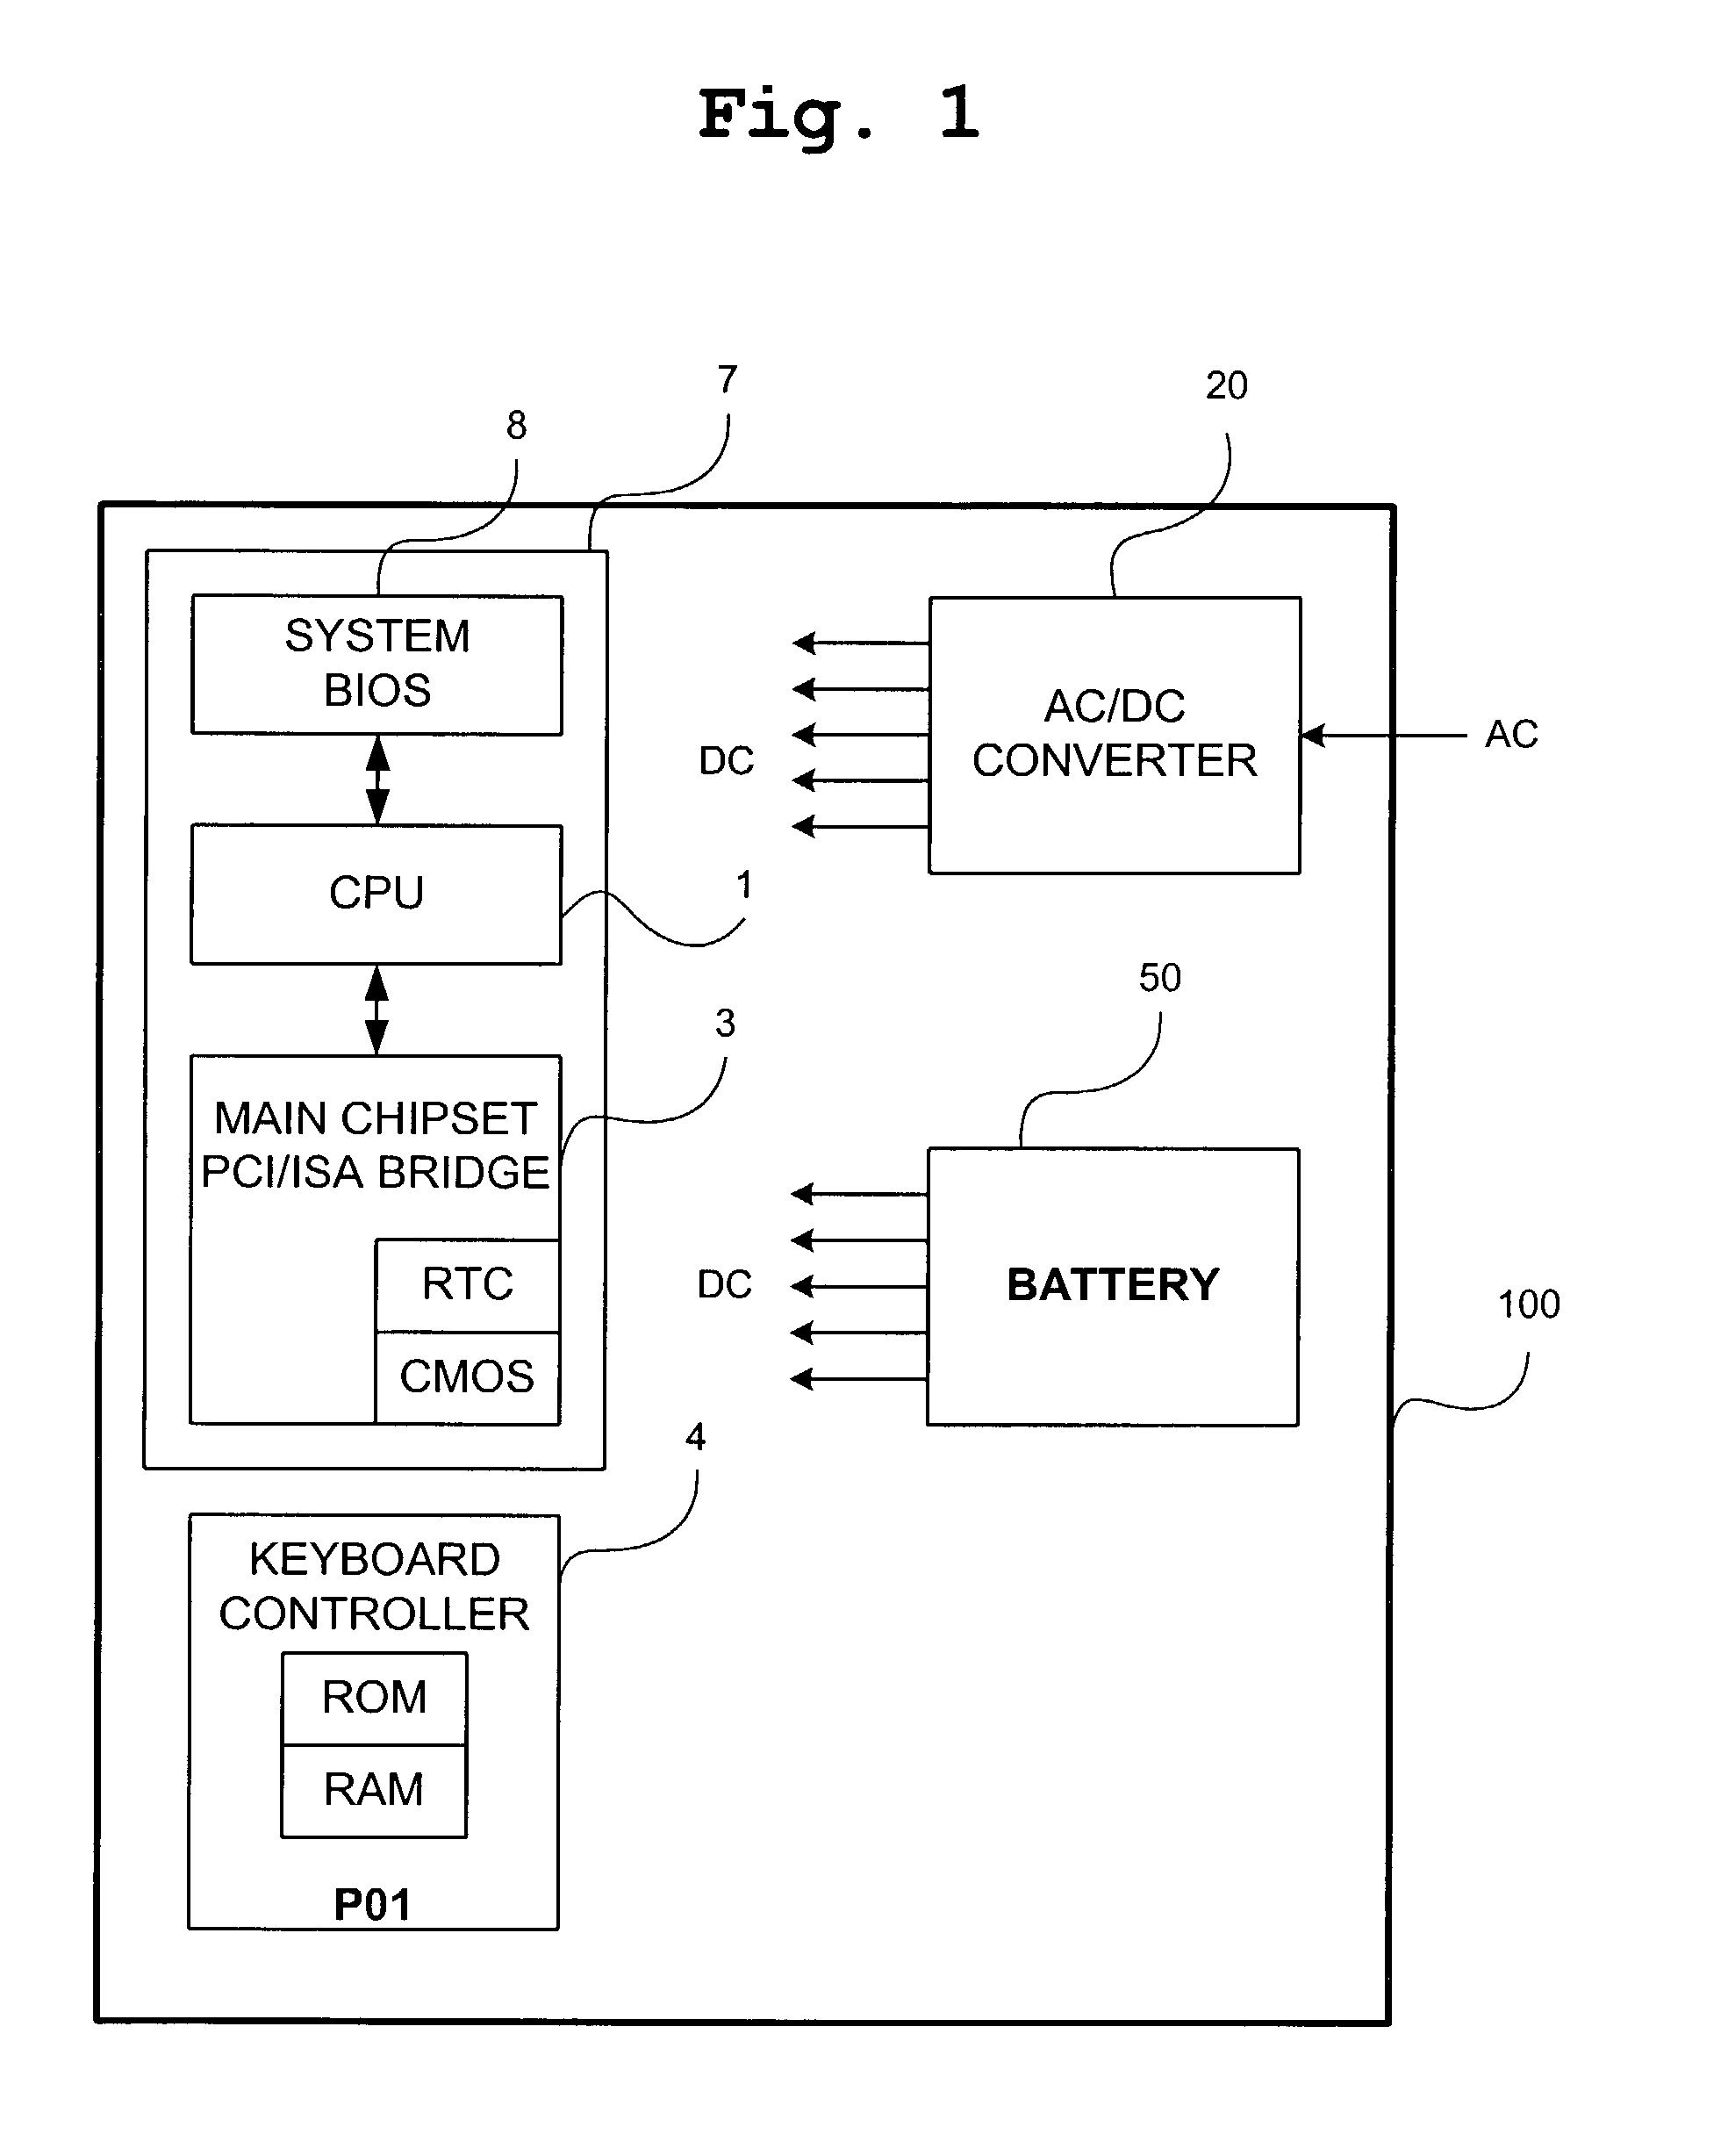 Microcomputer supporting plurality of systems utilizing a single keyboard BIOS